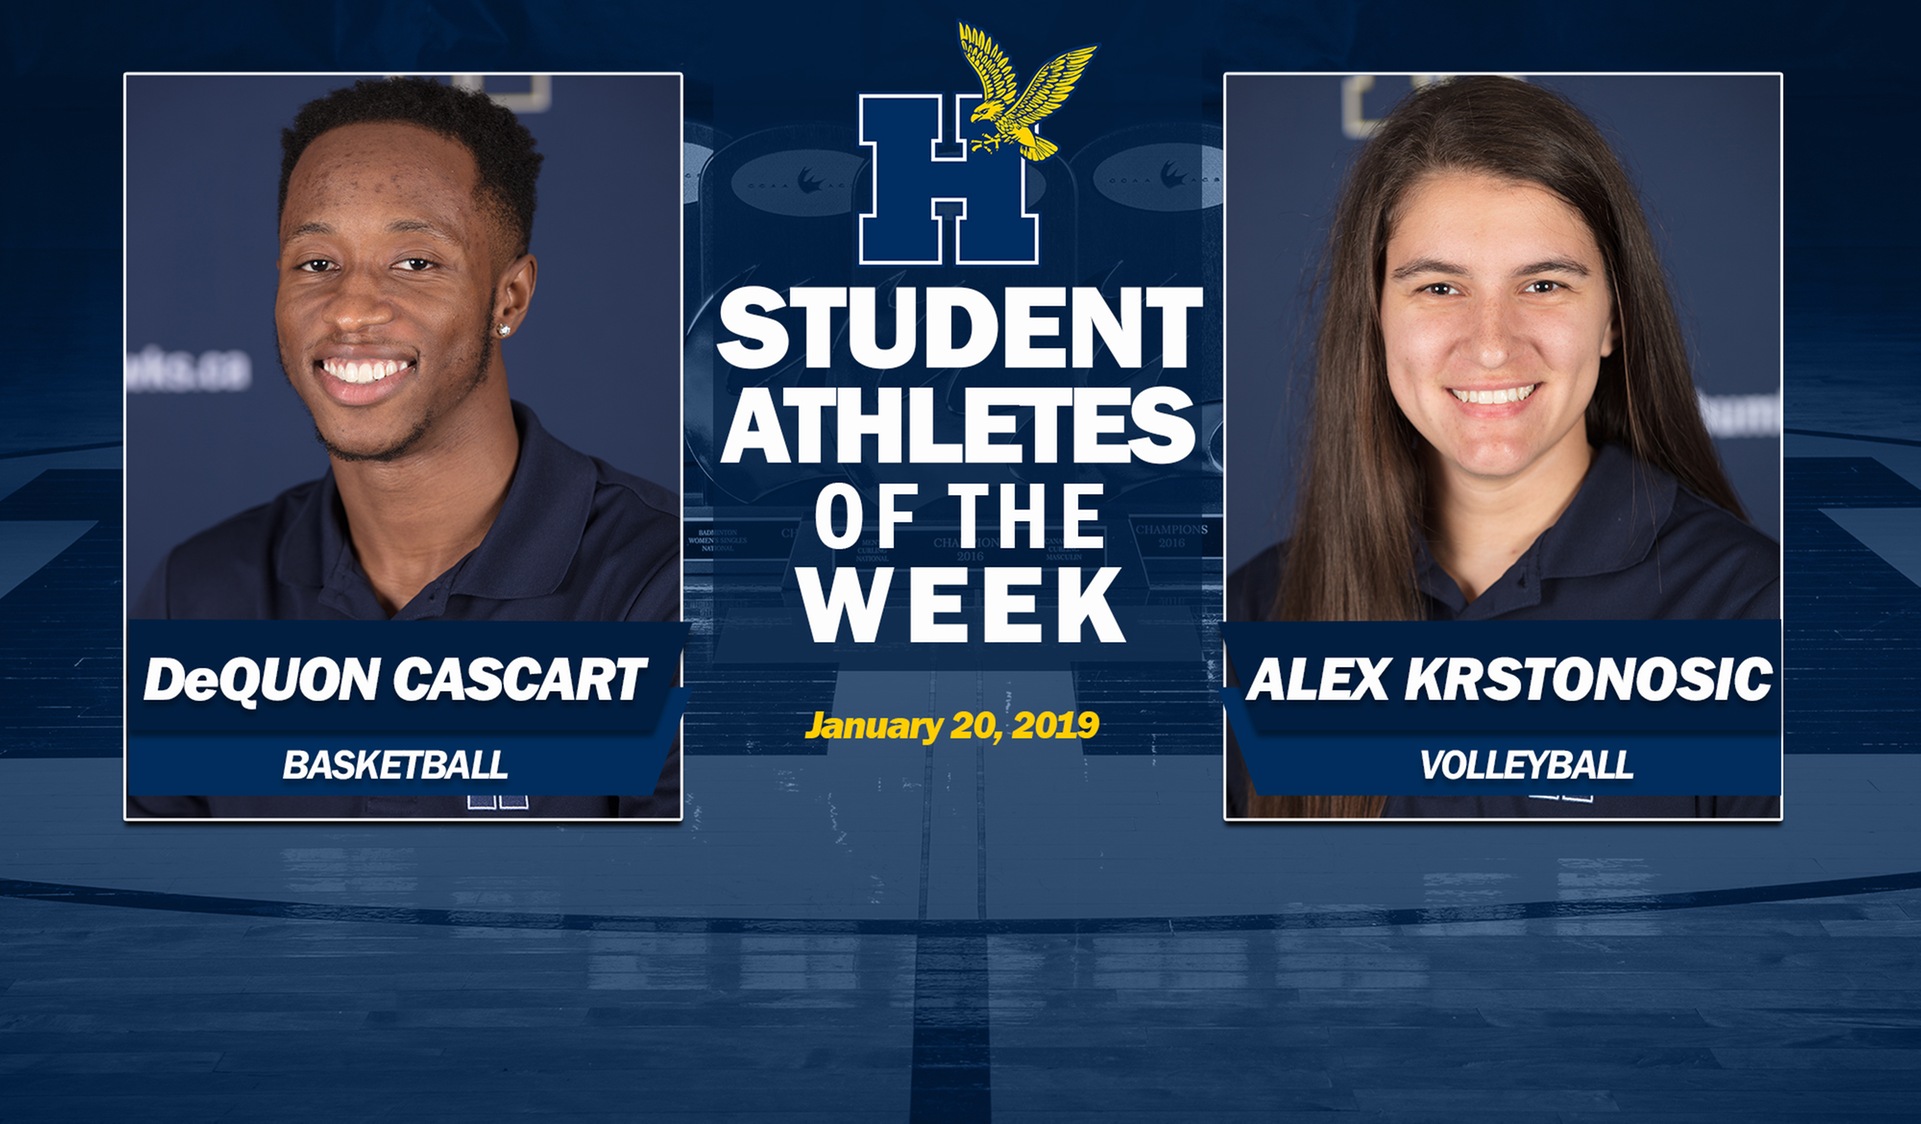 Cascart, Krstonosic Earn Humber Student-Athlete of the Week Honours